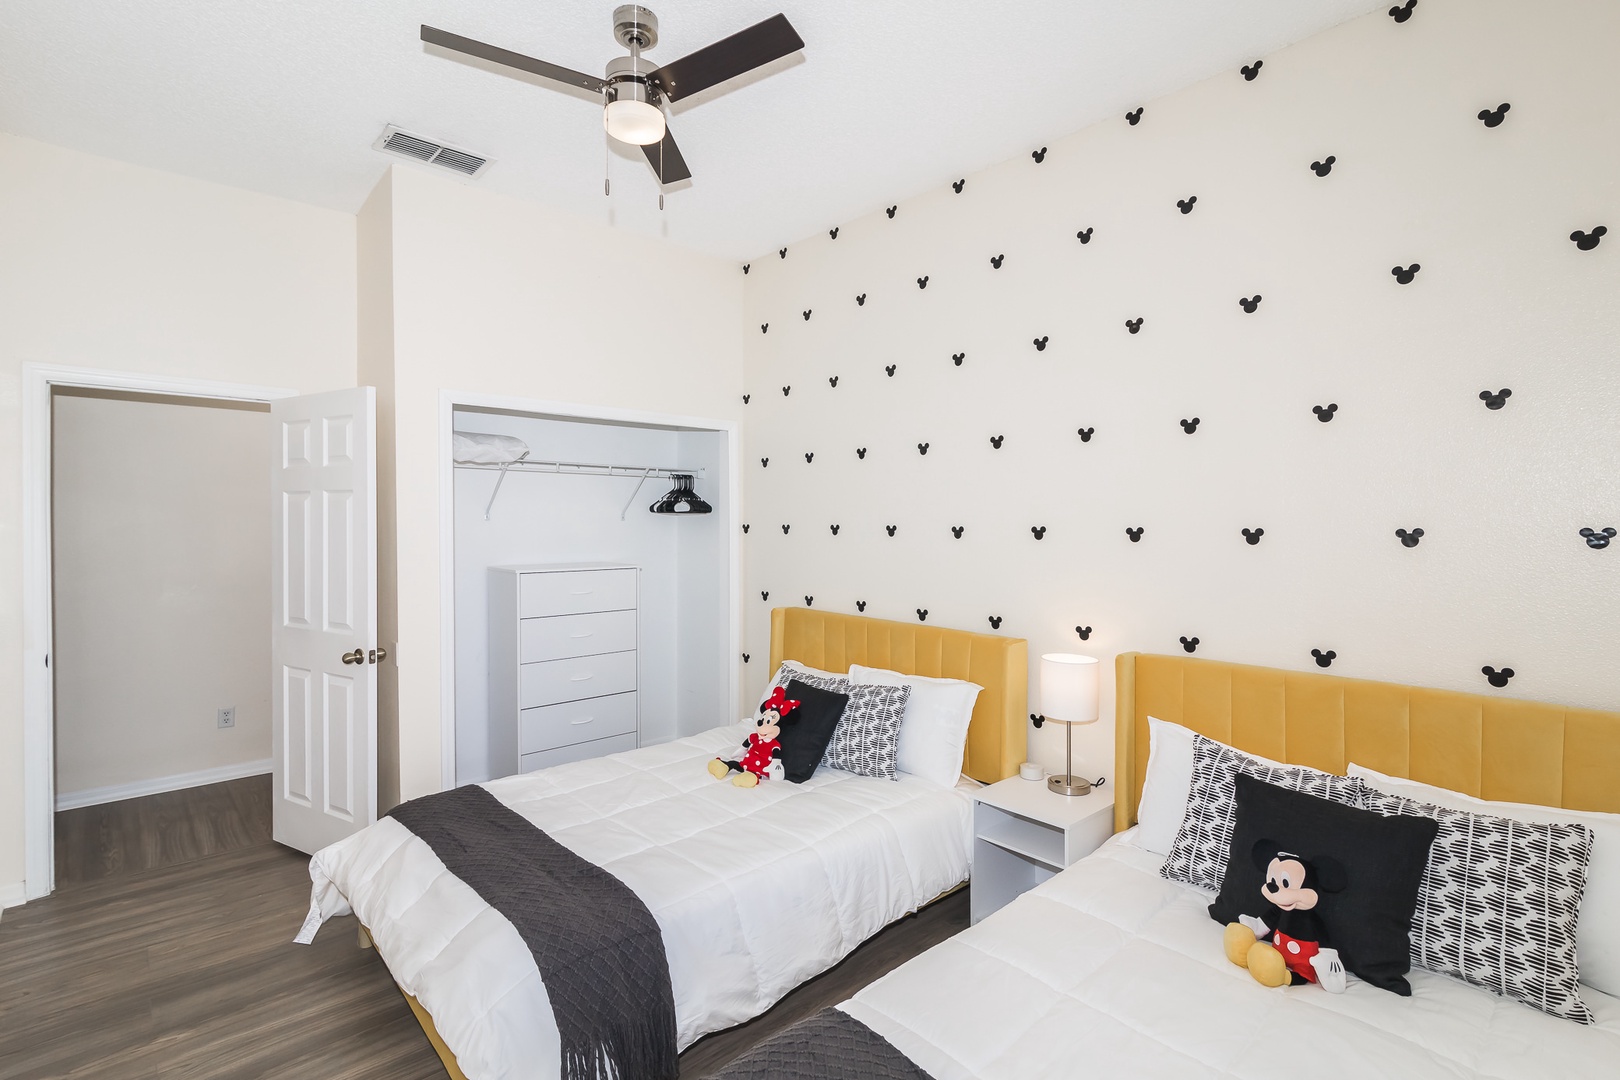 Bedroom 3 Mickey themed with 2 Full beds